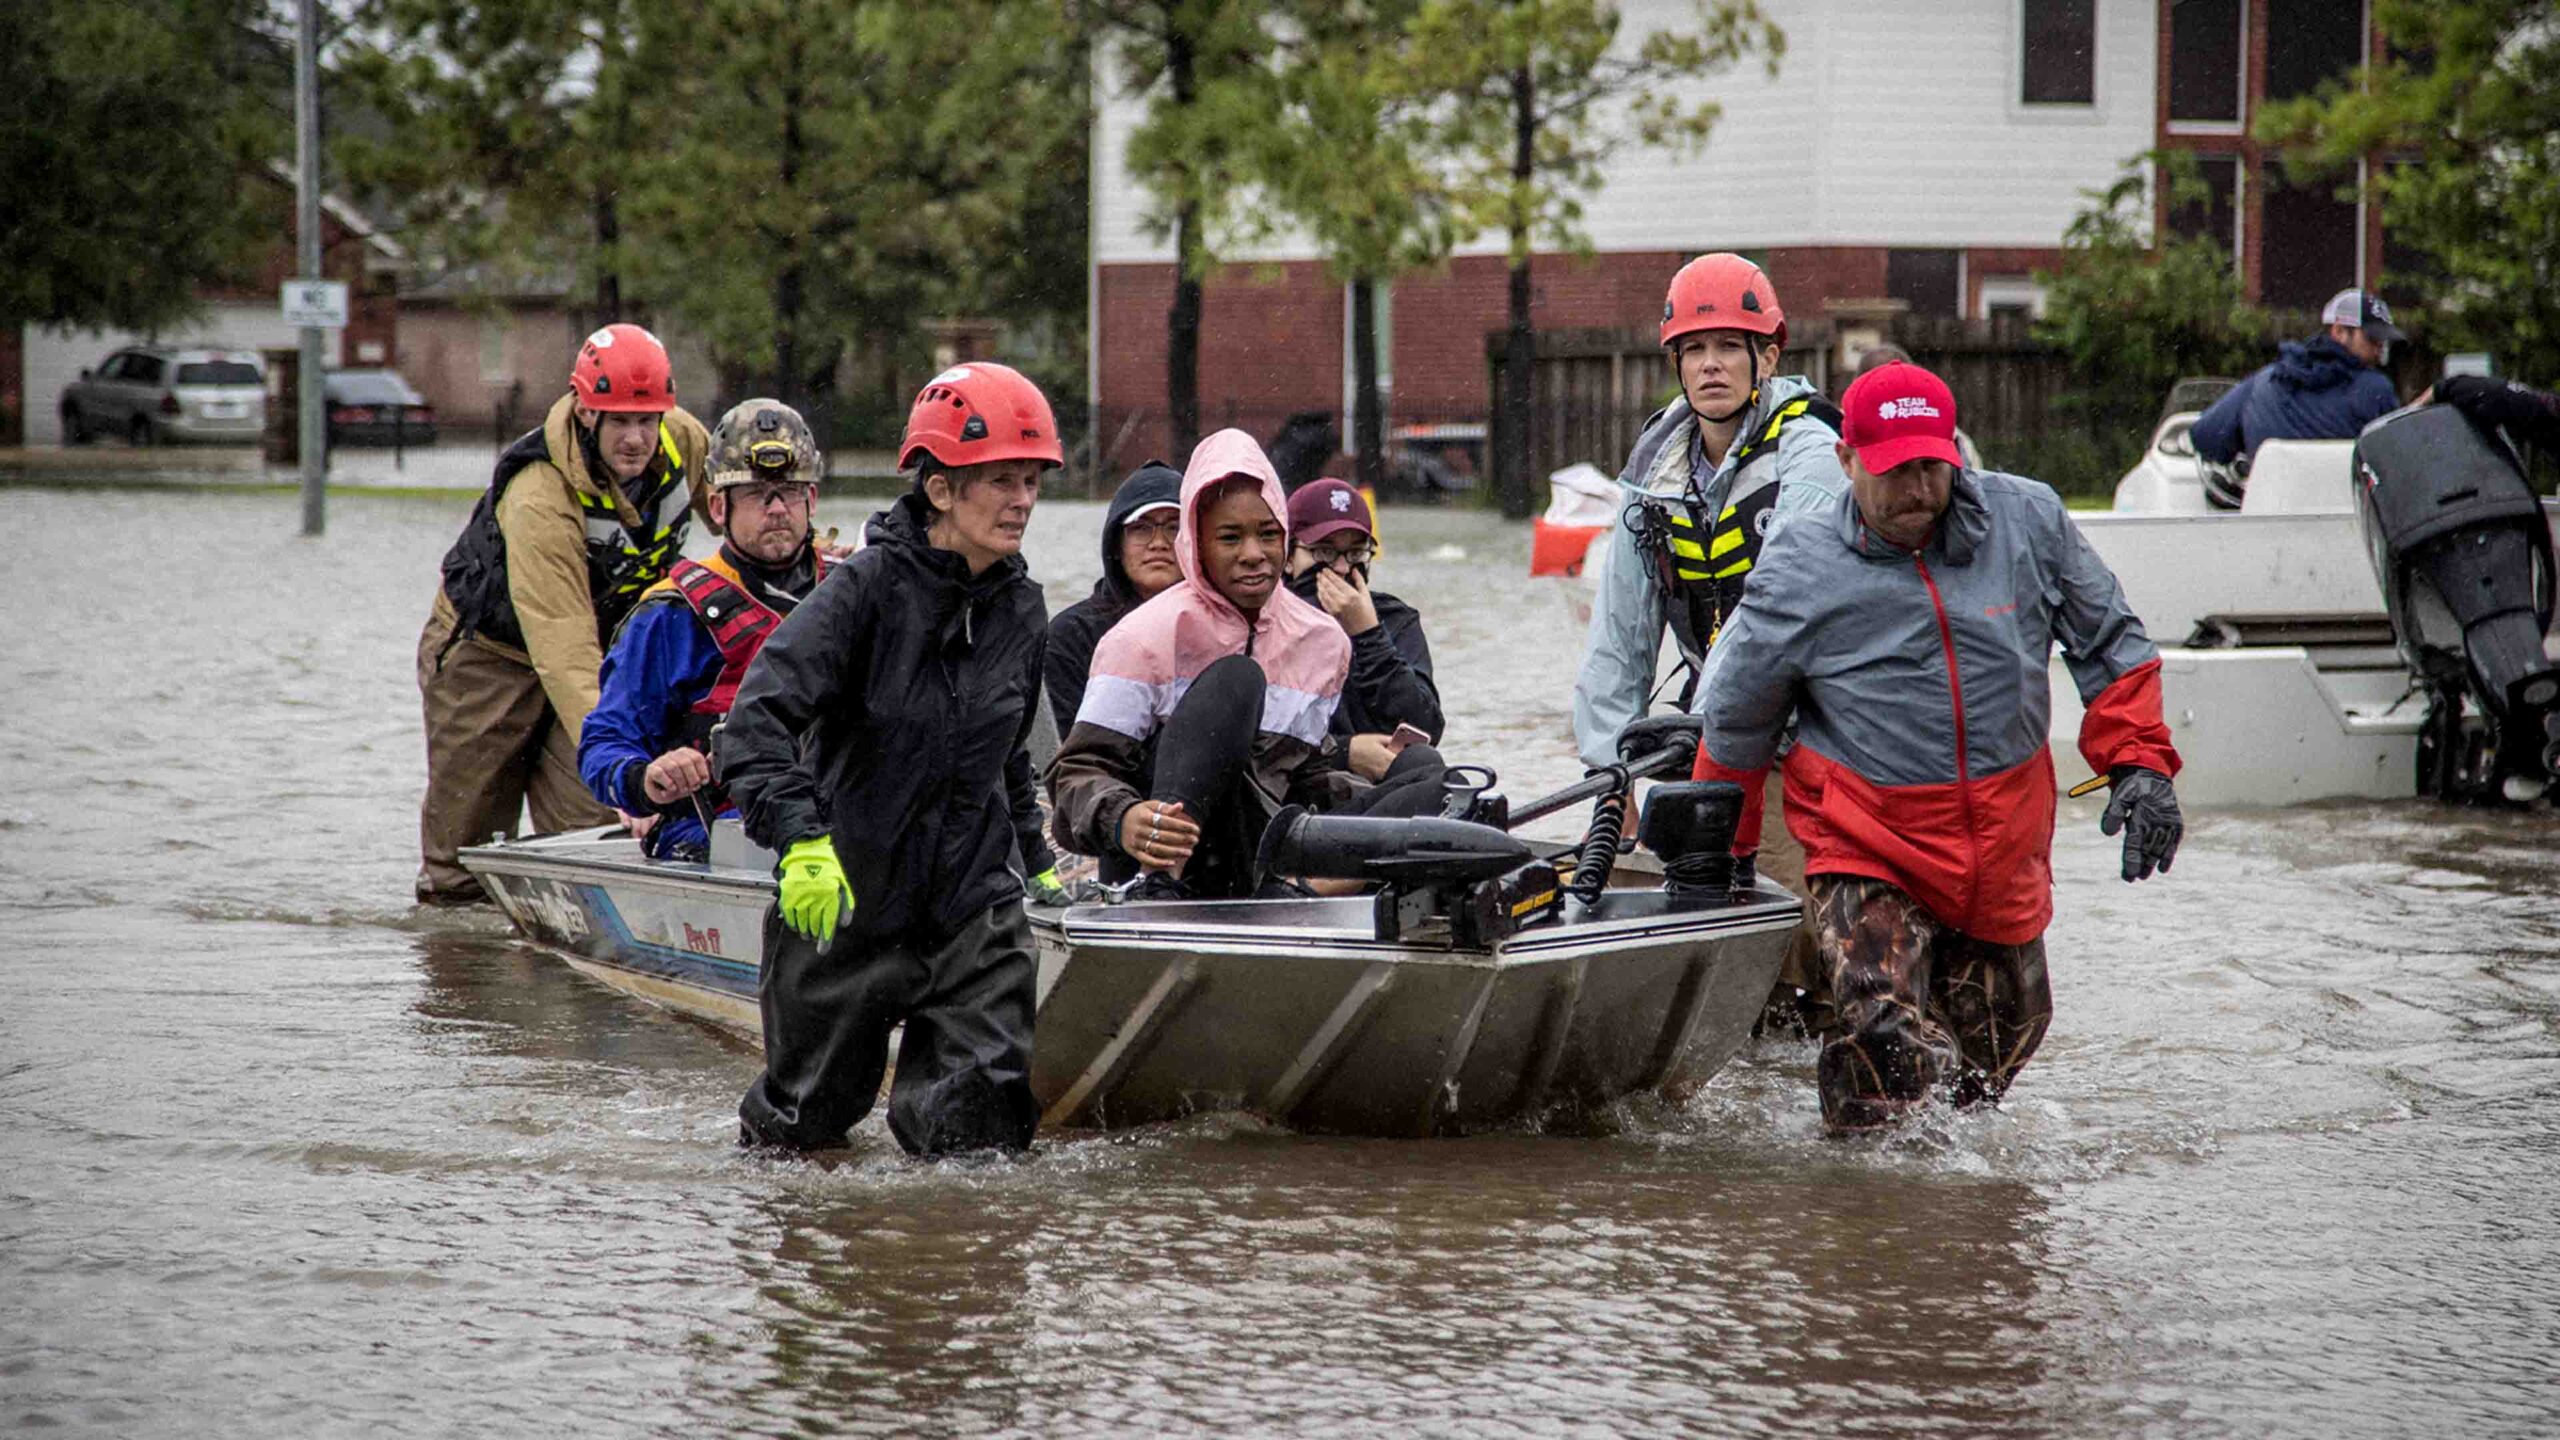 A group of people riding in a boat on a flooded street.